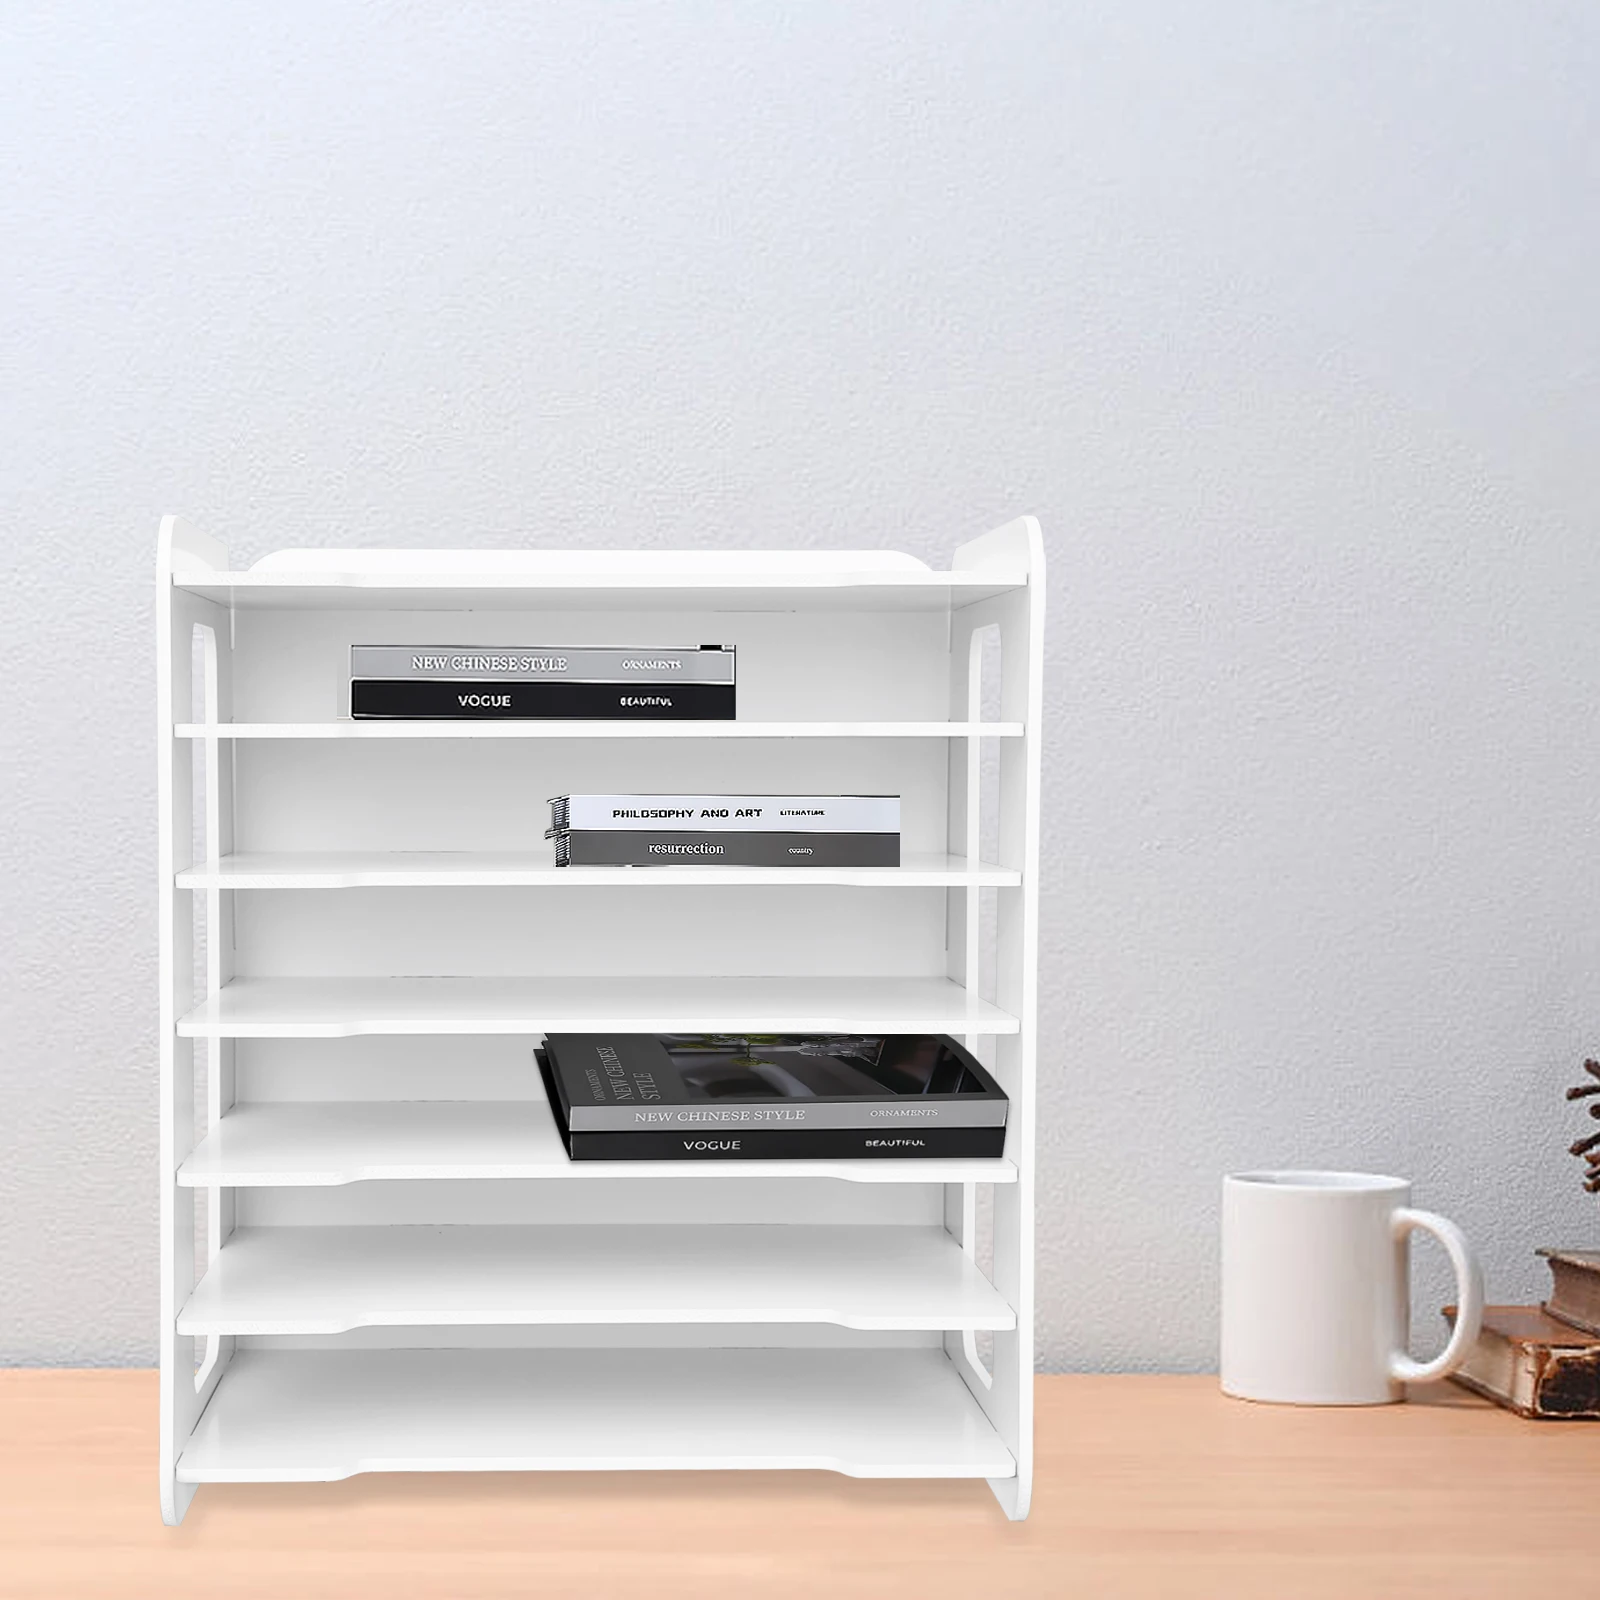 White Wooden File Rack for Office Desk, Desktop Organizers and Accessories, Letter Tray, Paper Sorter Holder, 7 Layers